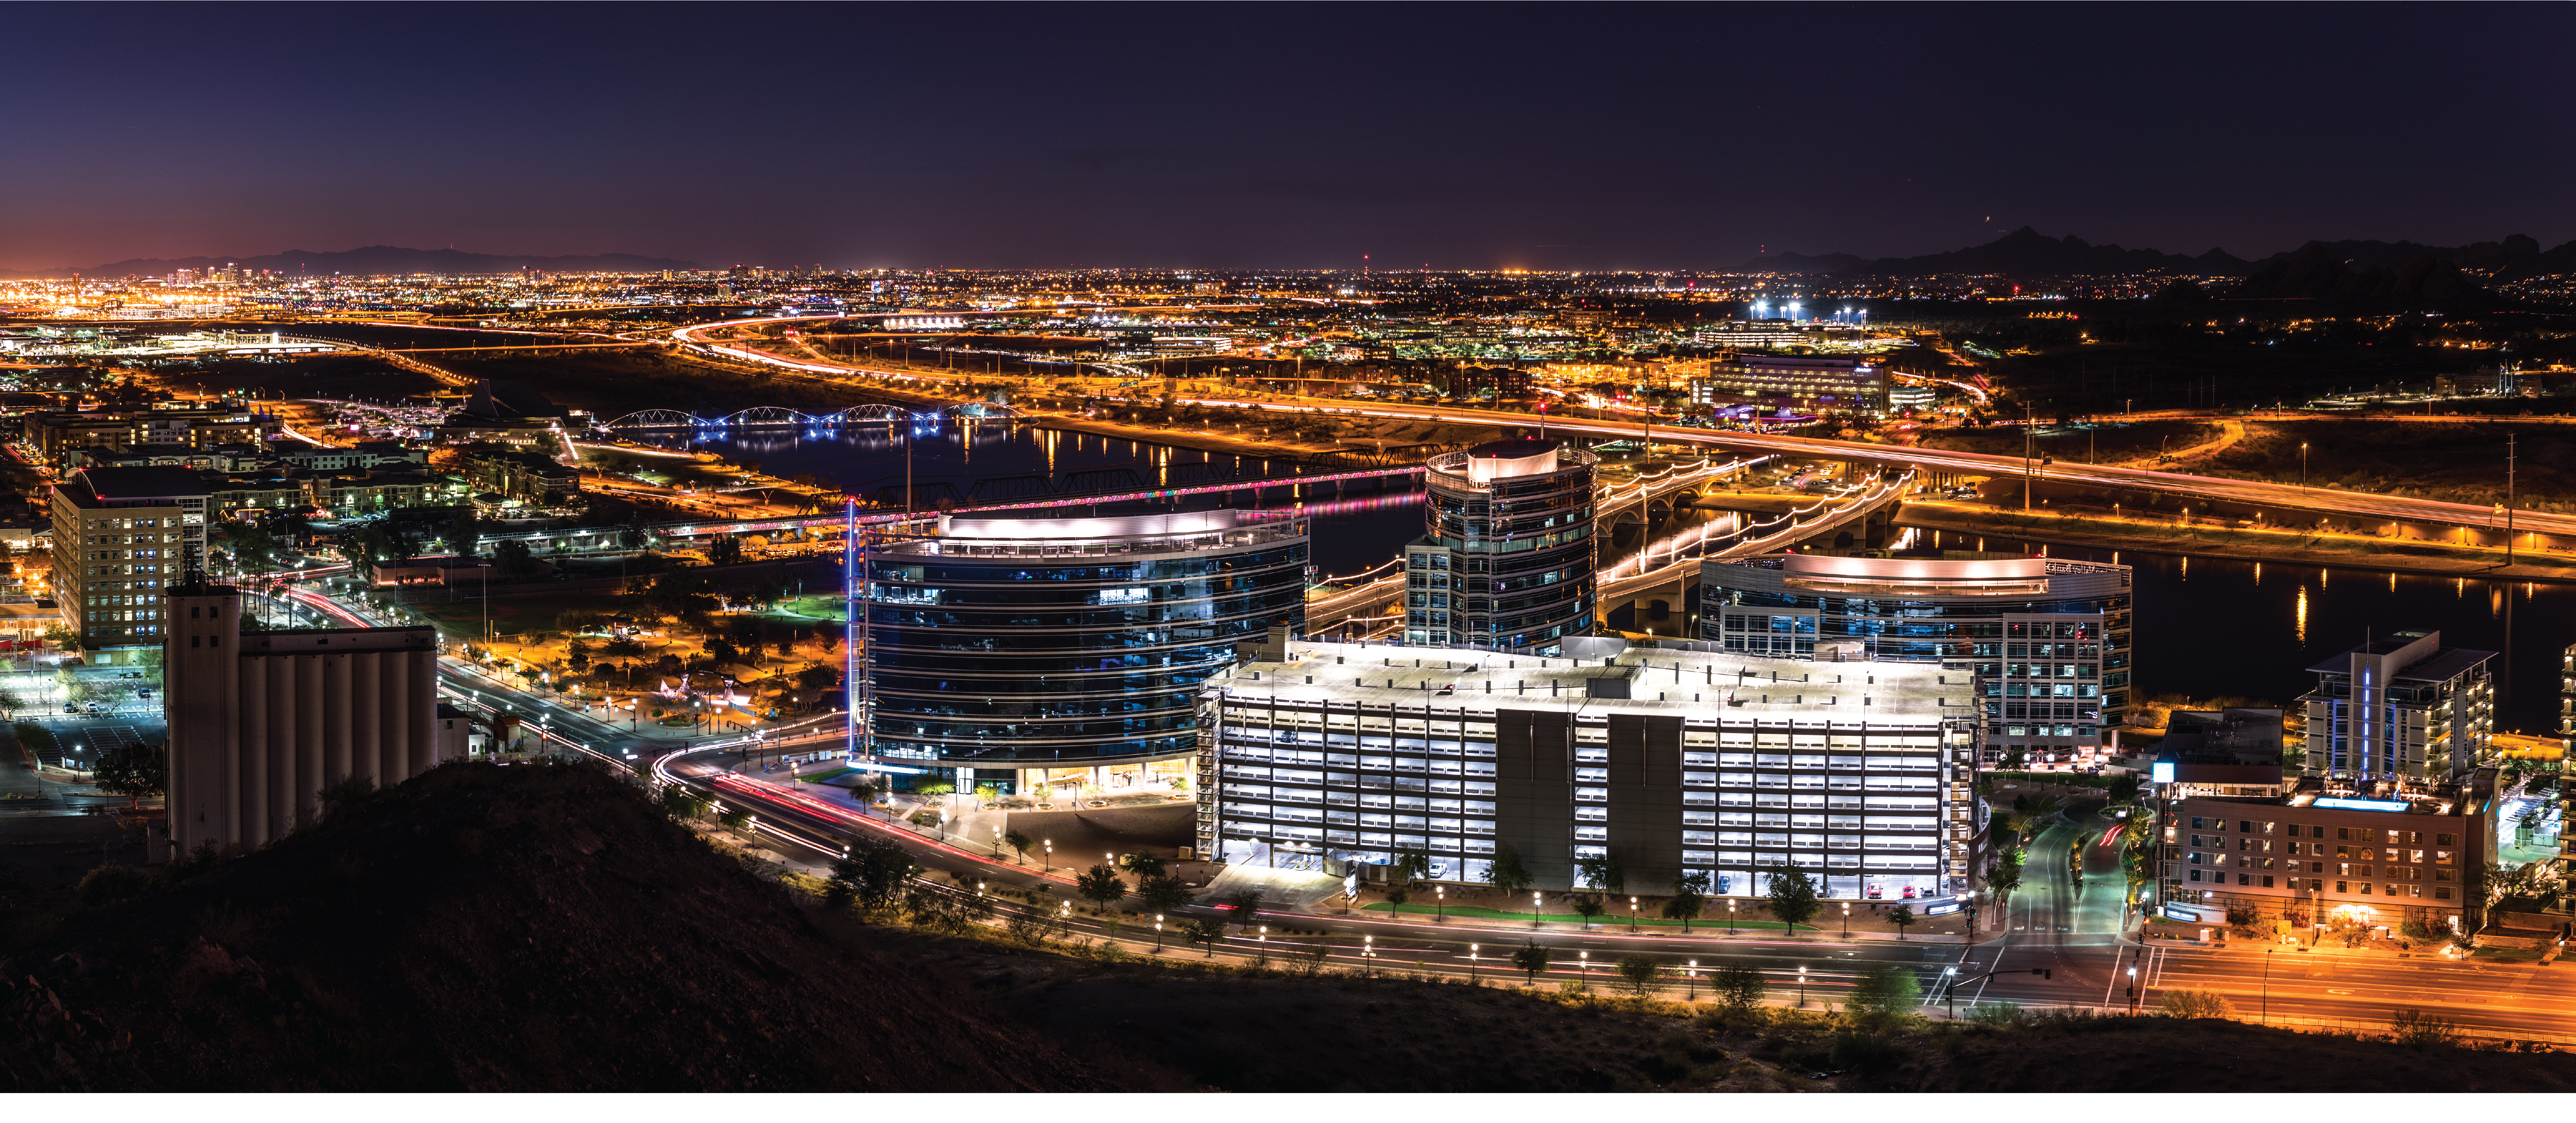 As a technology hub, Greater Phoenix is not a marketing strategy. This region is actively creating opportunities for the families and businesses that call this region home.